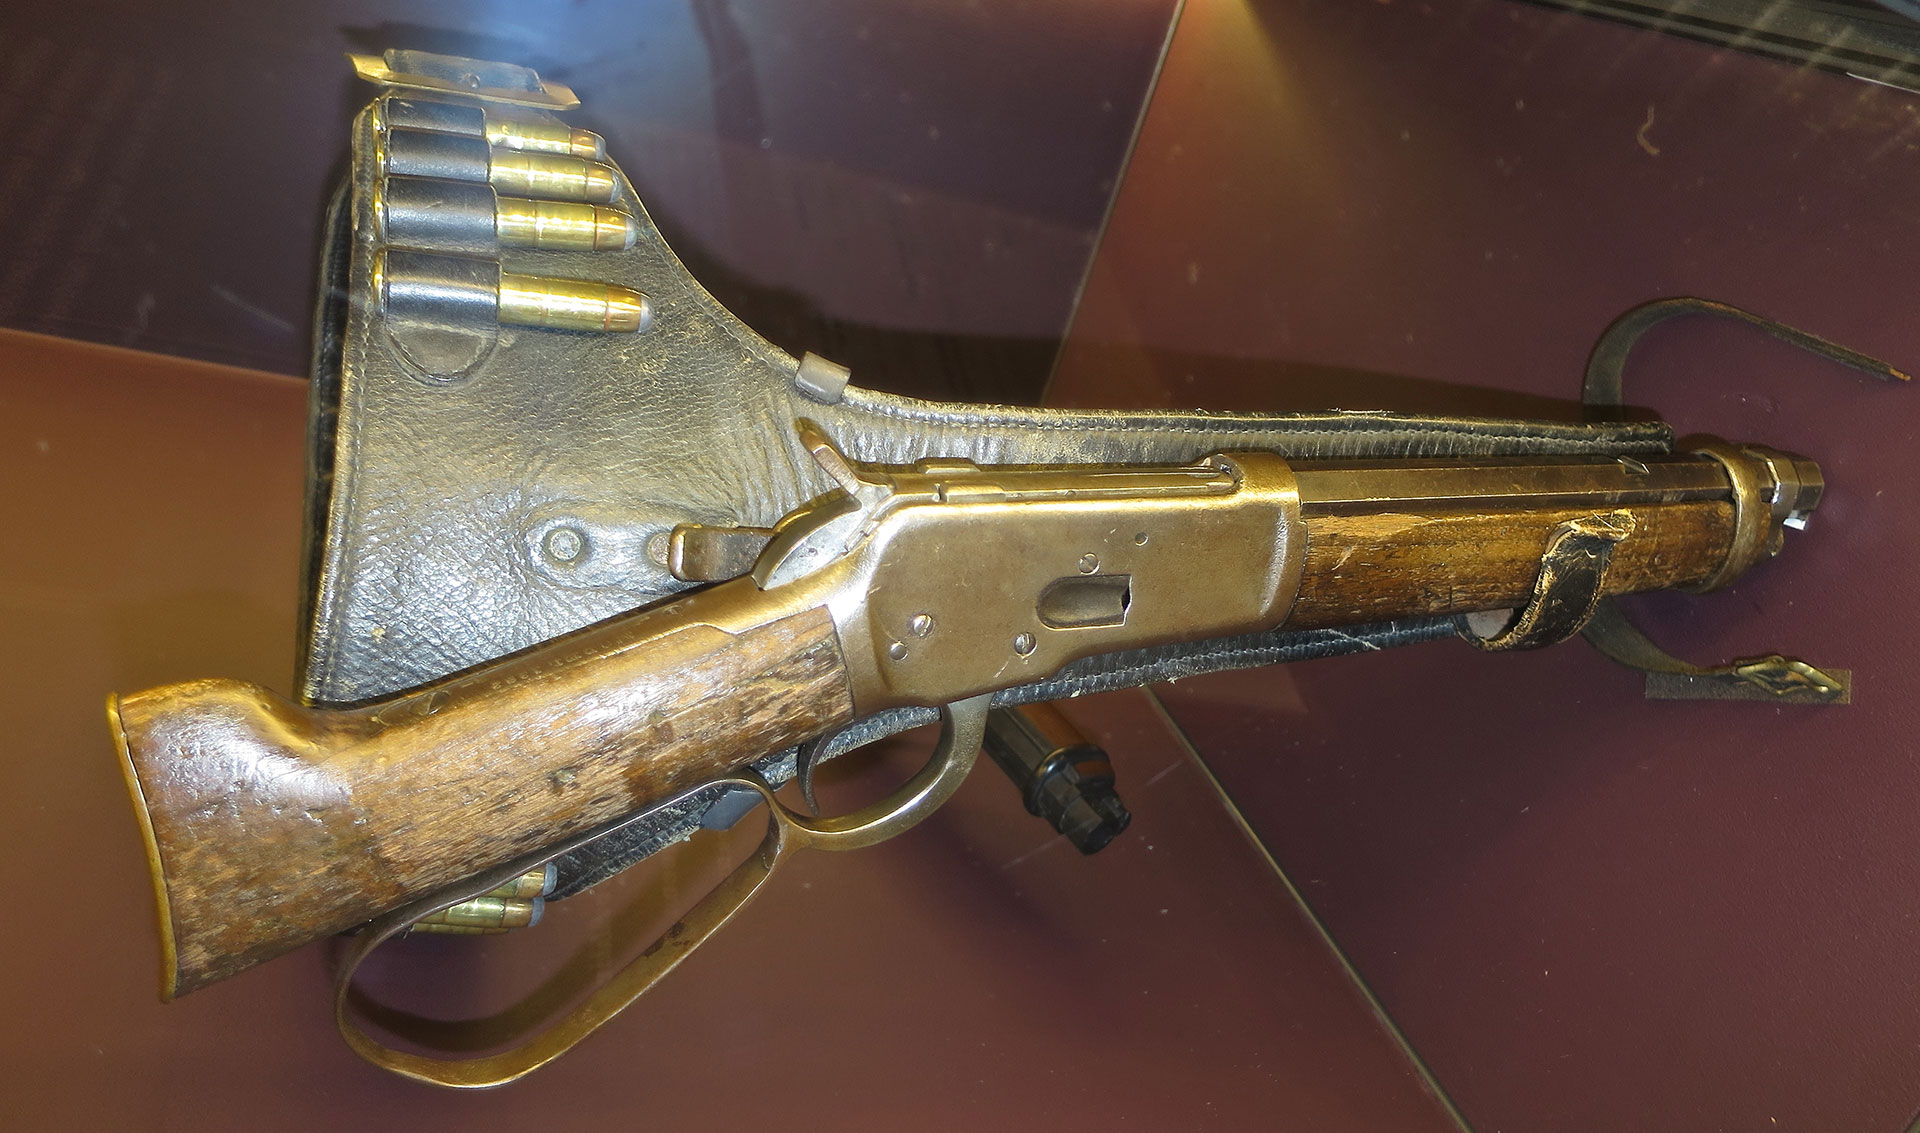 One of the two “teardrop” lever-action Mare’s Legs used in the “Wanted Dead or Alive” TV series. This gun is now on display at the Autry Museum of the American West (theautry.org) in Los Angeles, Calif.